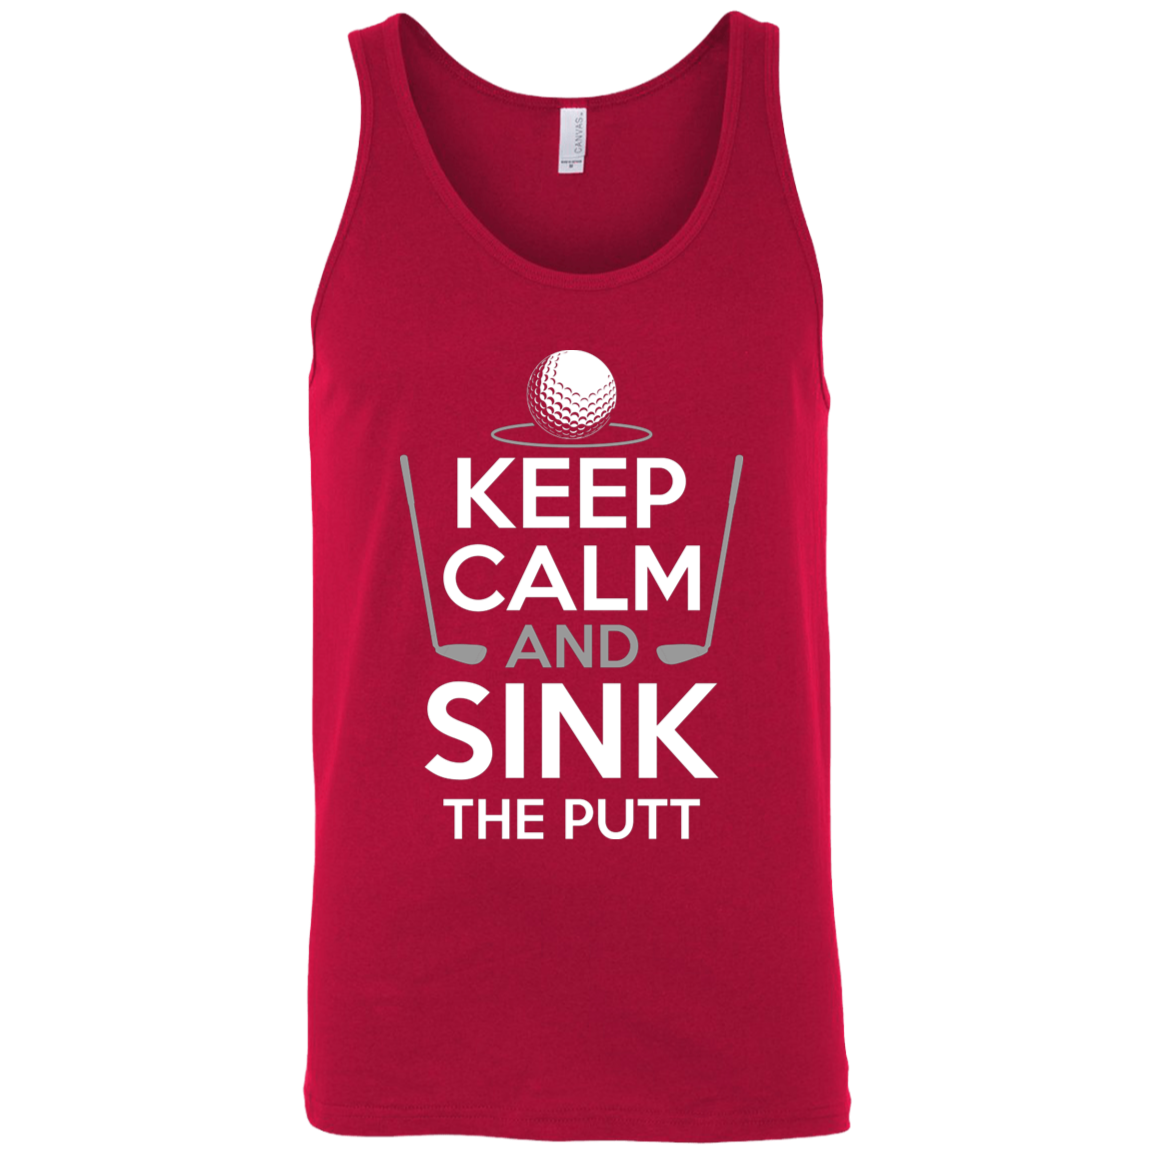 Keep Calm And Sink The Putt Tank Top Apparel - The Beer Lodge